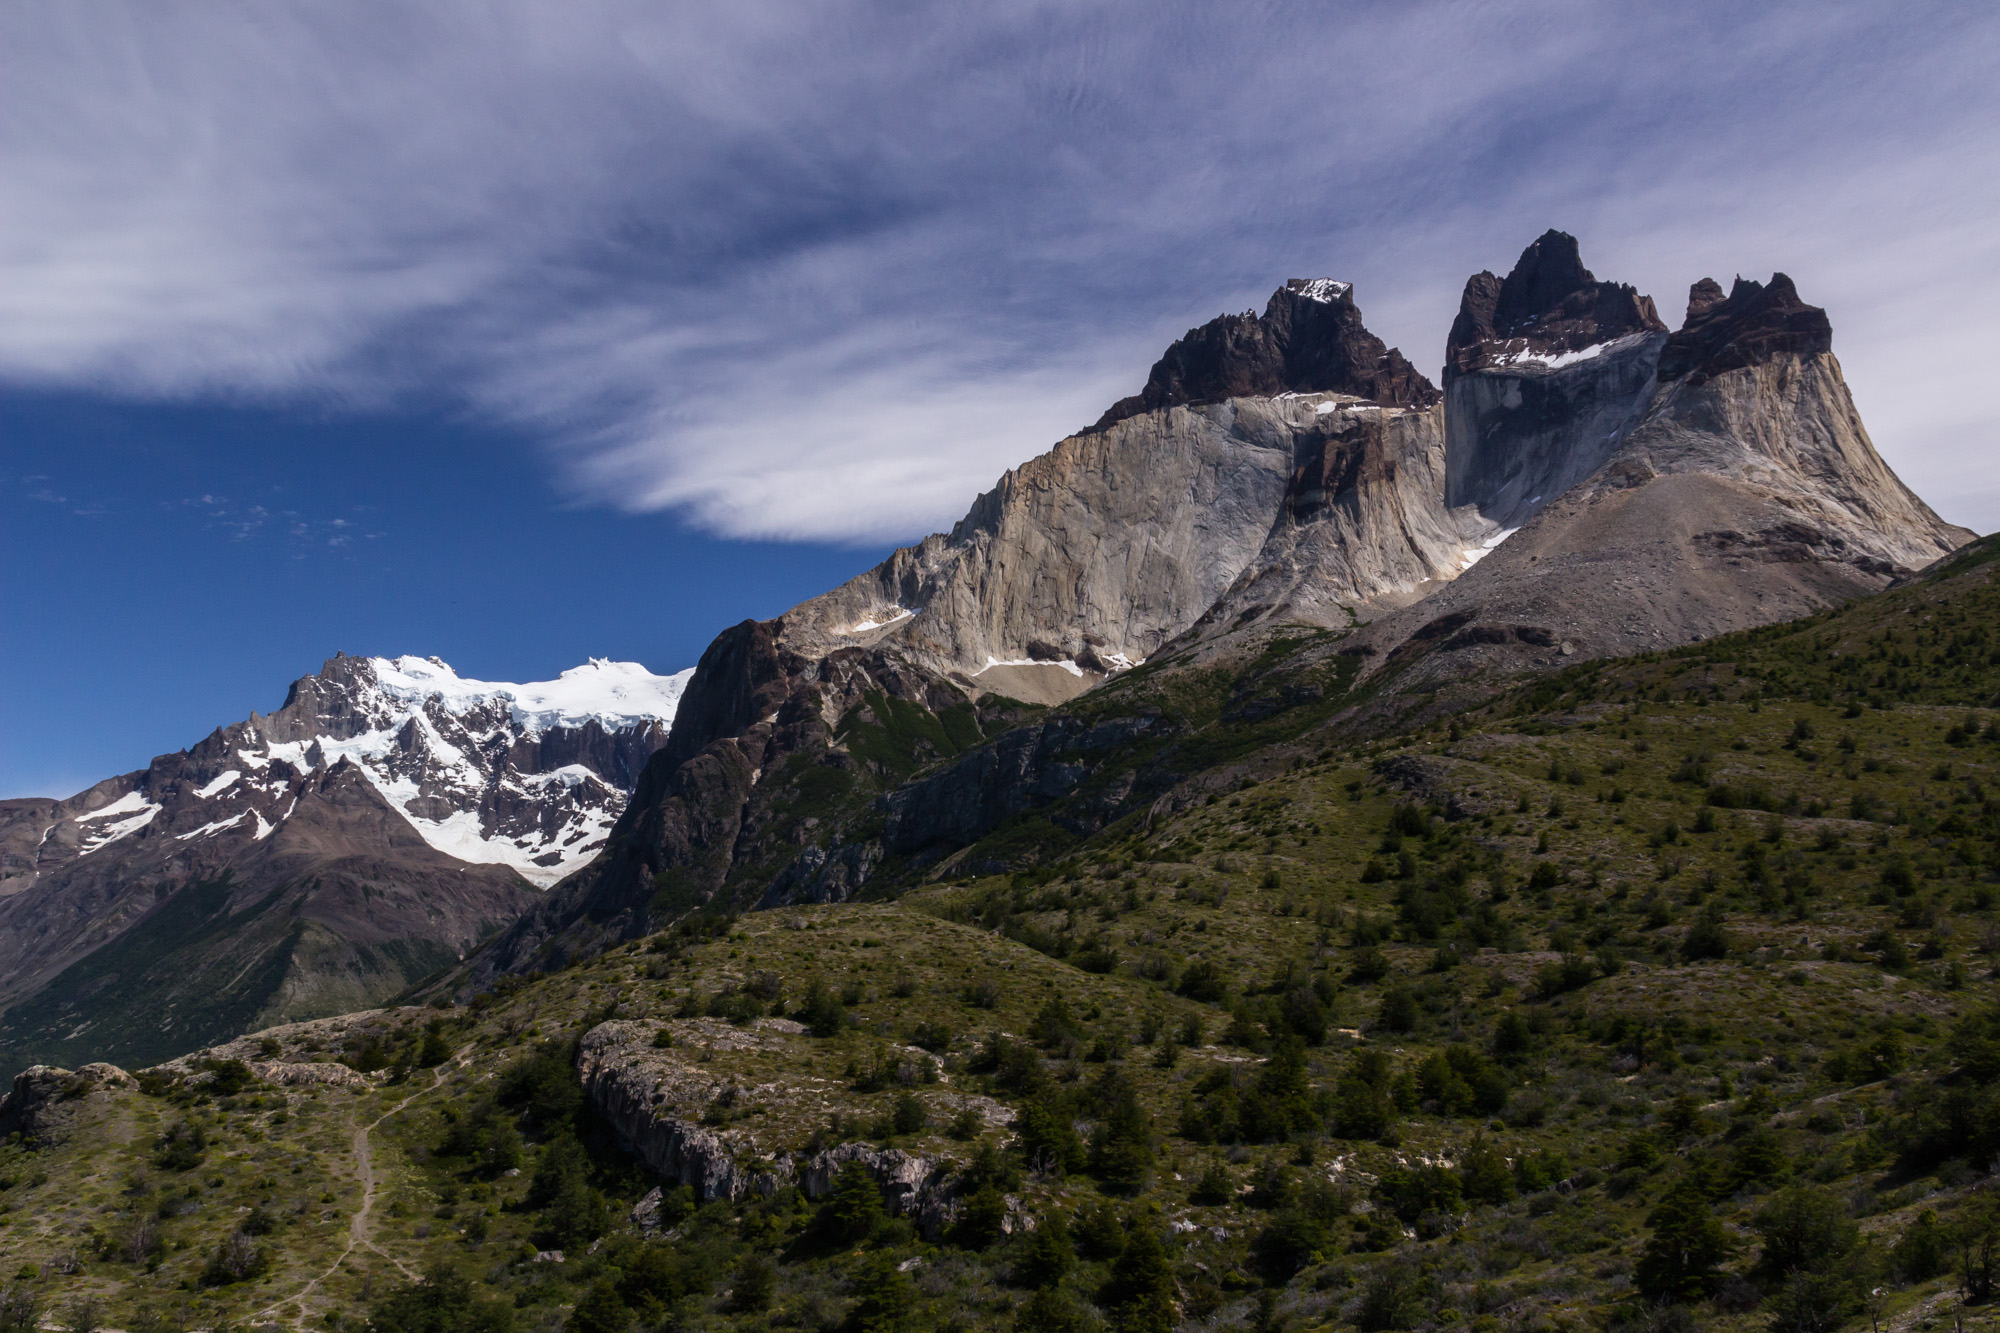 Glacial erosion has carved the dramatic landscape of the park and often the softer sedimentary rock is only preserved on the very top of the peaks, as seen here on the well-named Los Cuernos 